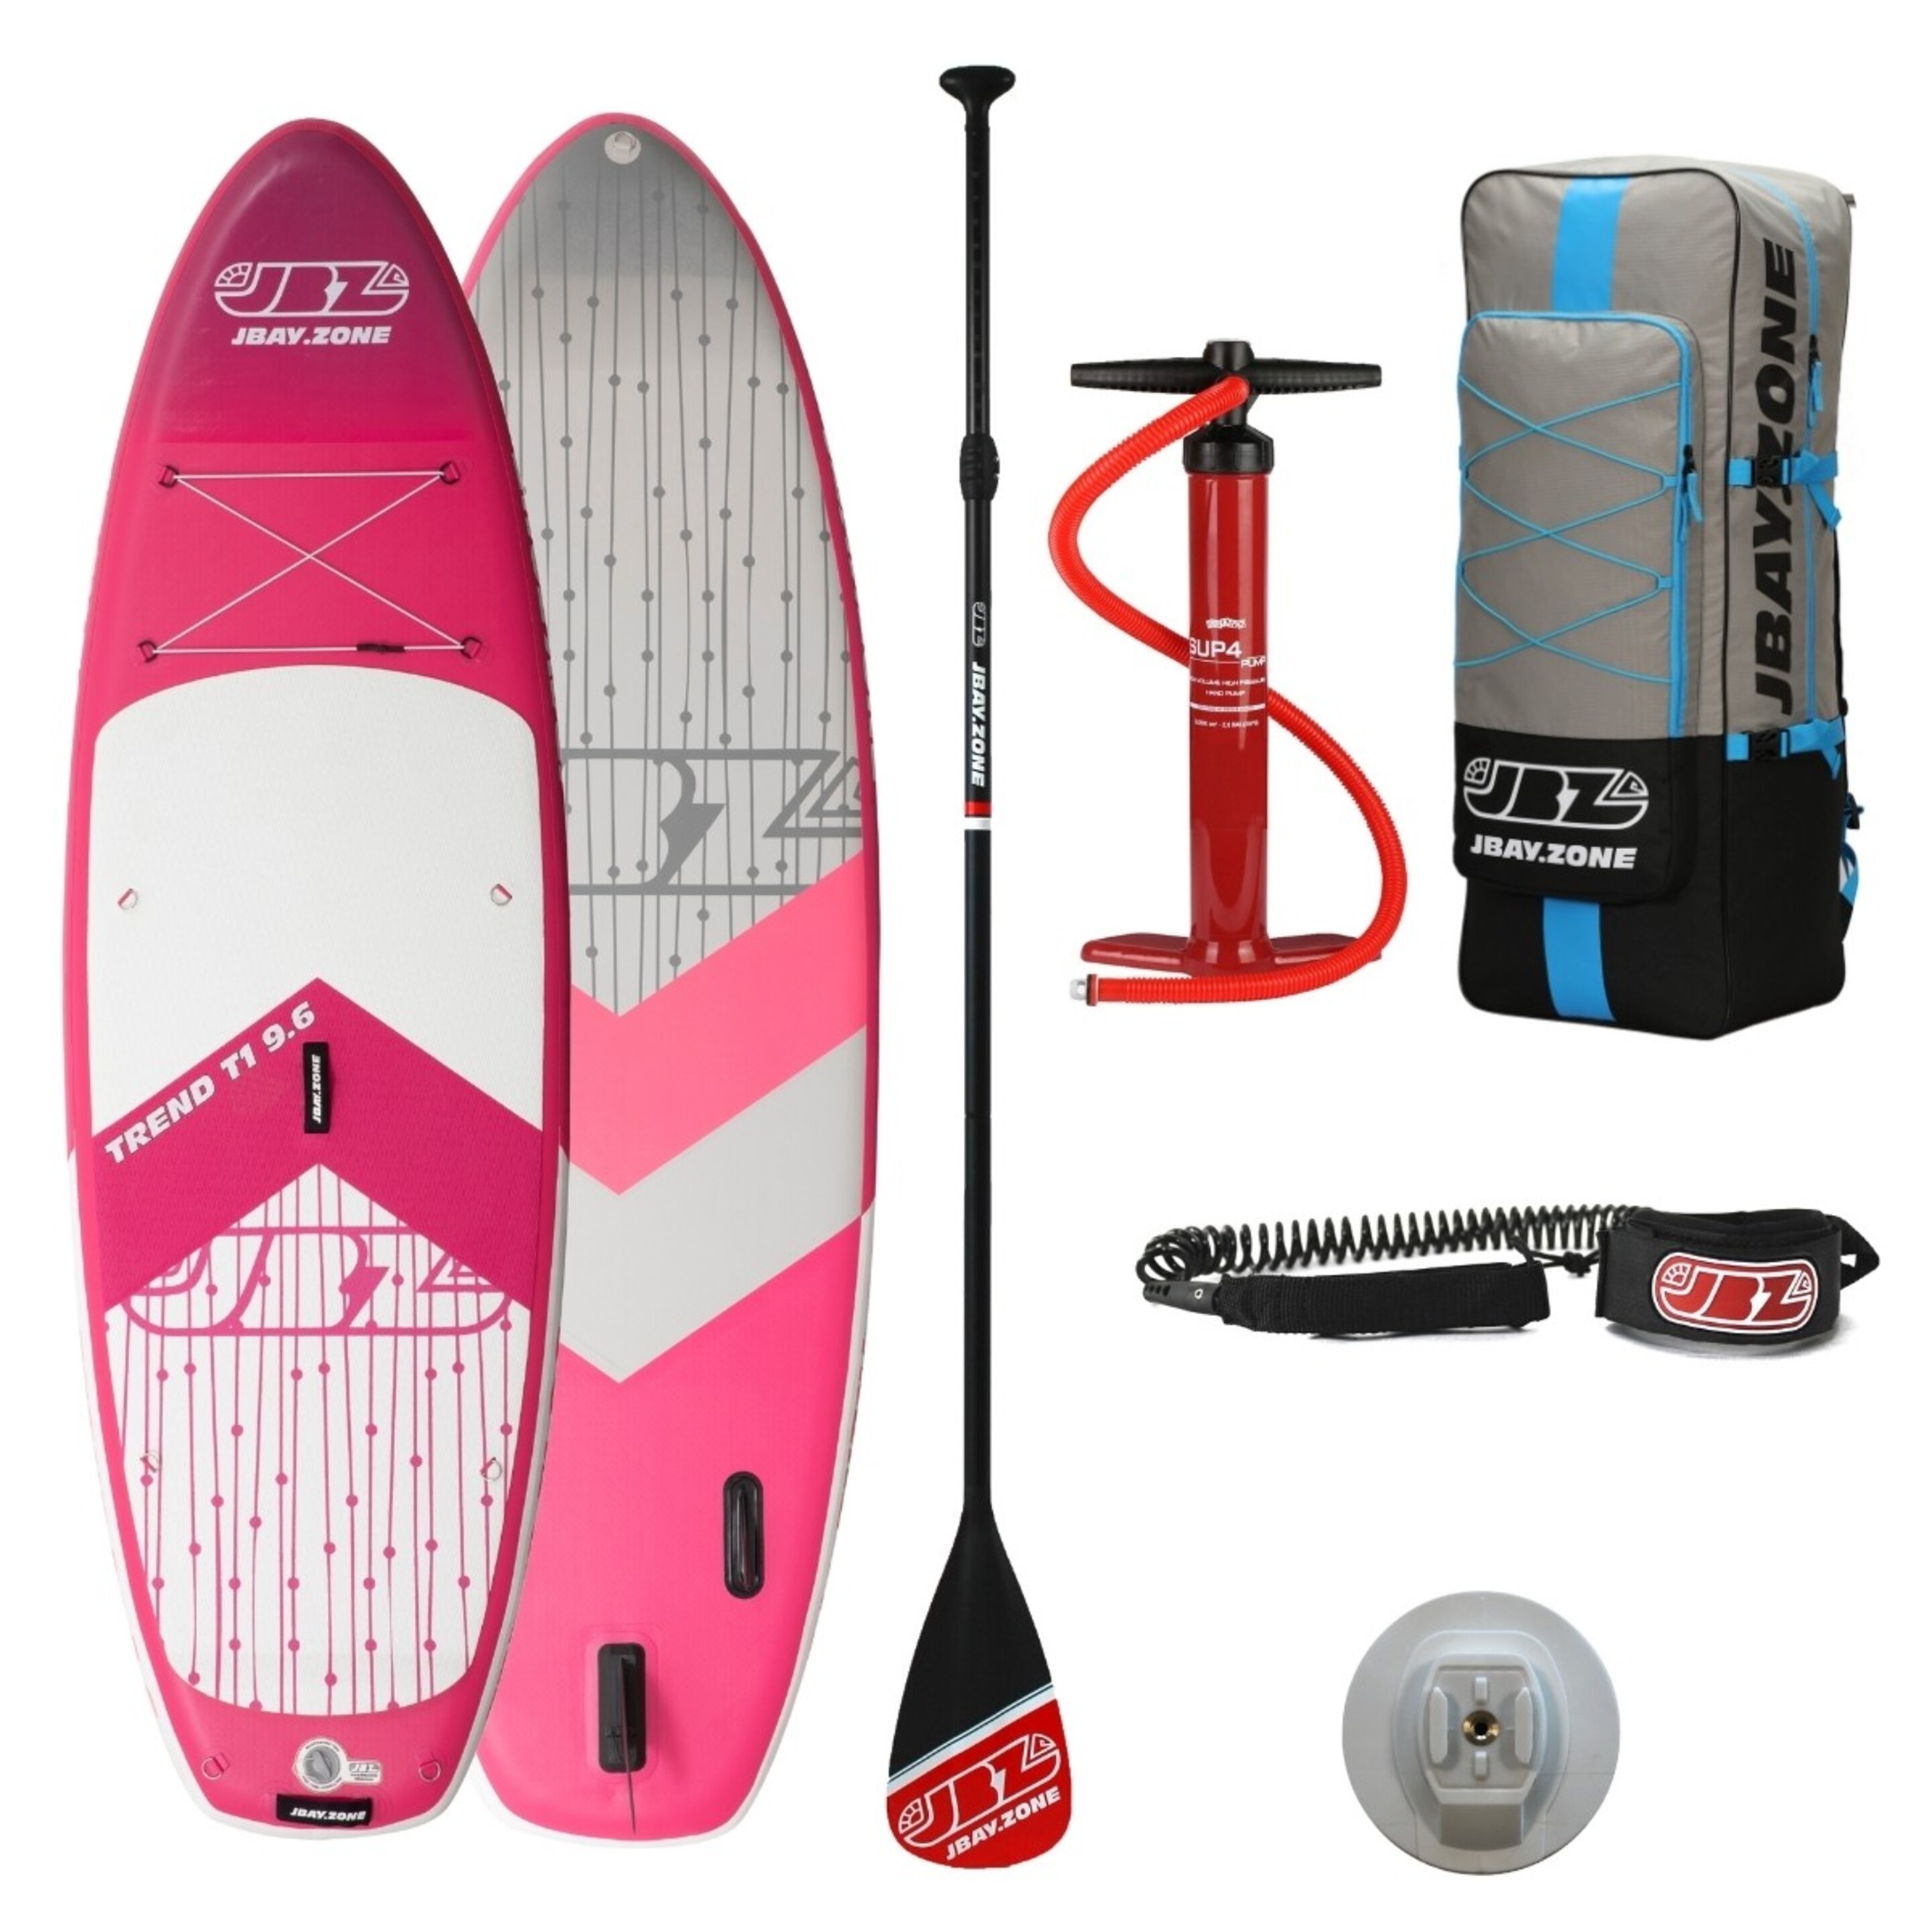 Tabla De Stand Up Paddle Surf Sup Hinchable Jbay.zone Modelo Trend T1